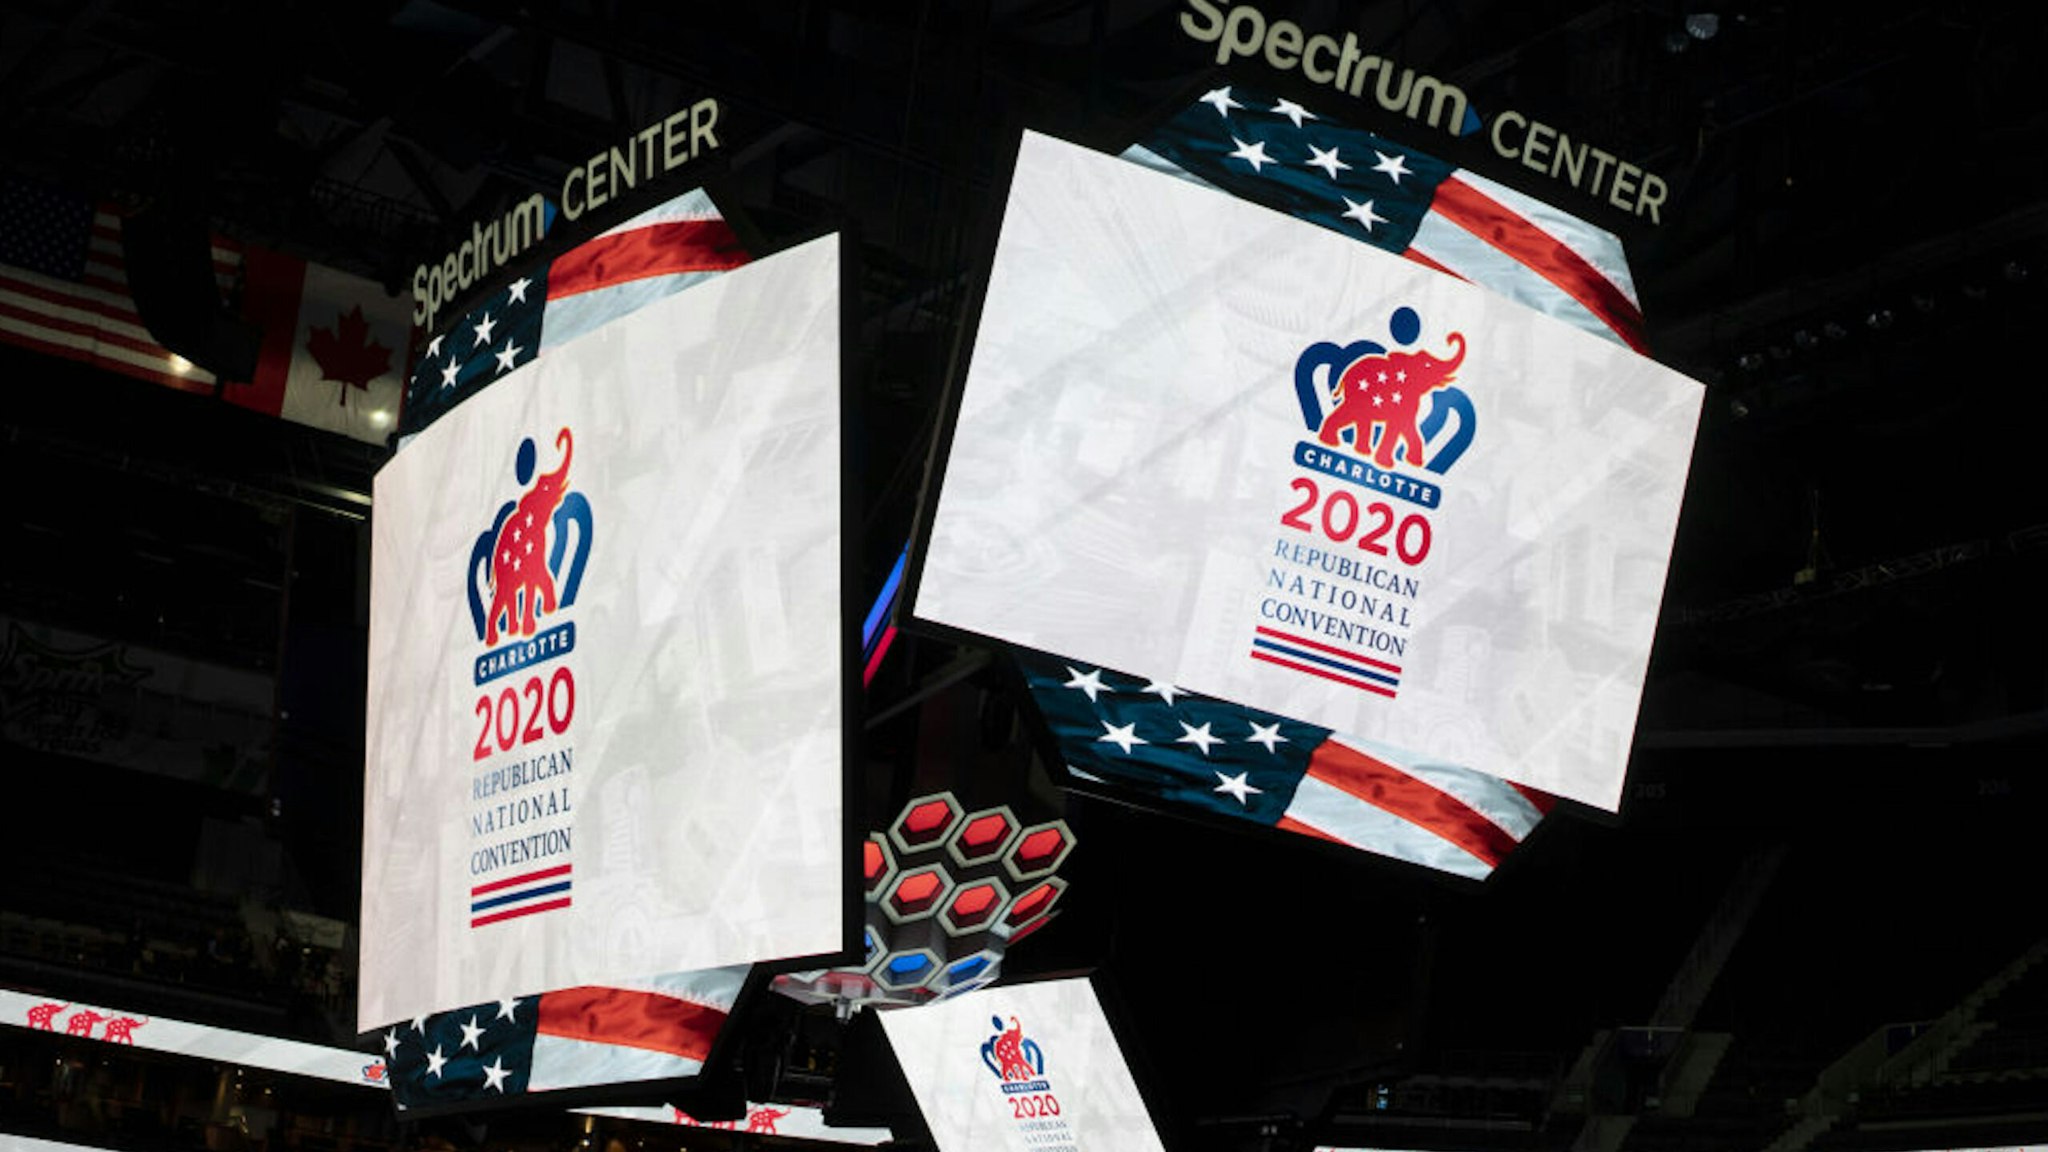 2020 Republican National Convention (RNC) signage is displayed inside the Spectrum Center during a media walk-through in Charlotte, North Carolina, U.S., on Tuesday, Nov. 12, 2019. The 2020 RNC will be held at the Spectrum Center from August 24-27.